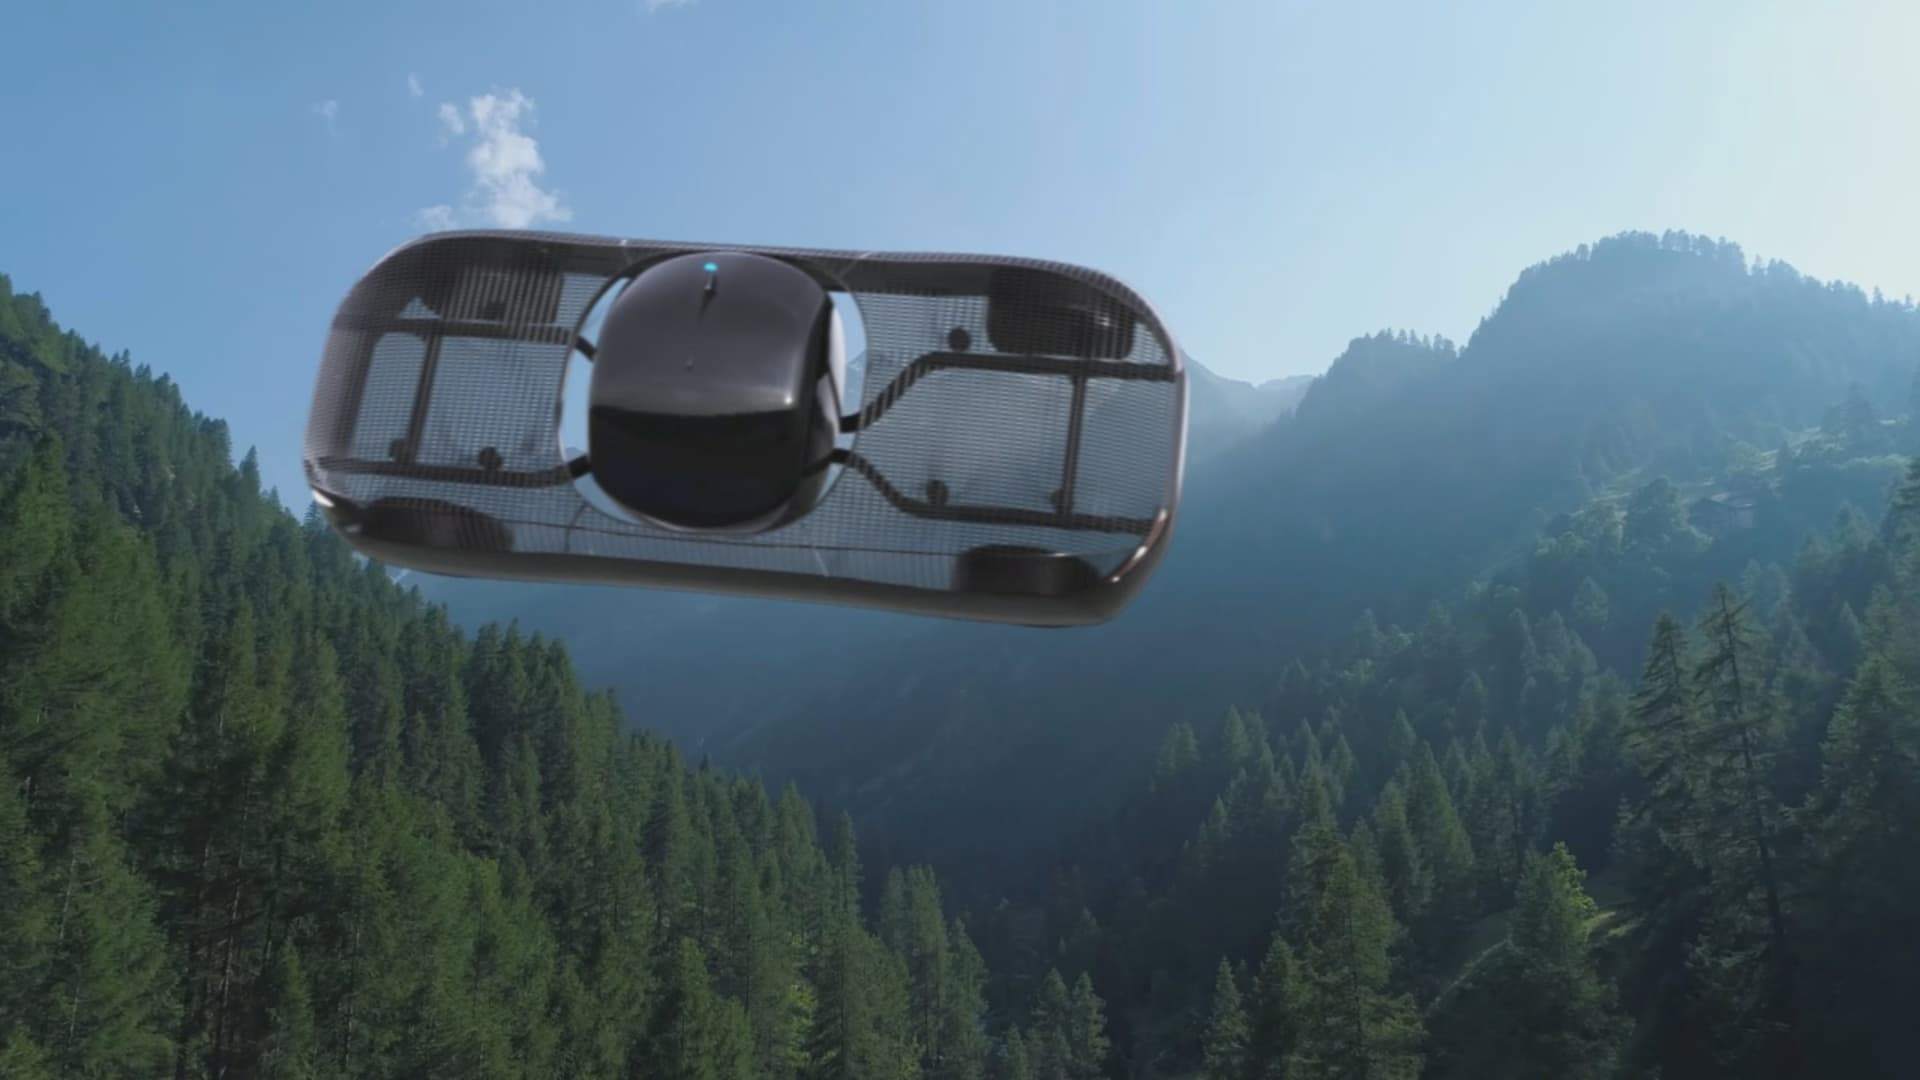 Startup backed by Tesla investor promises $300,000 flying car by 2025: 'This is not more complicated than a Toyota Corolla'